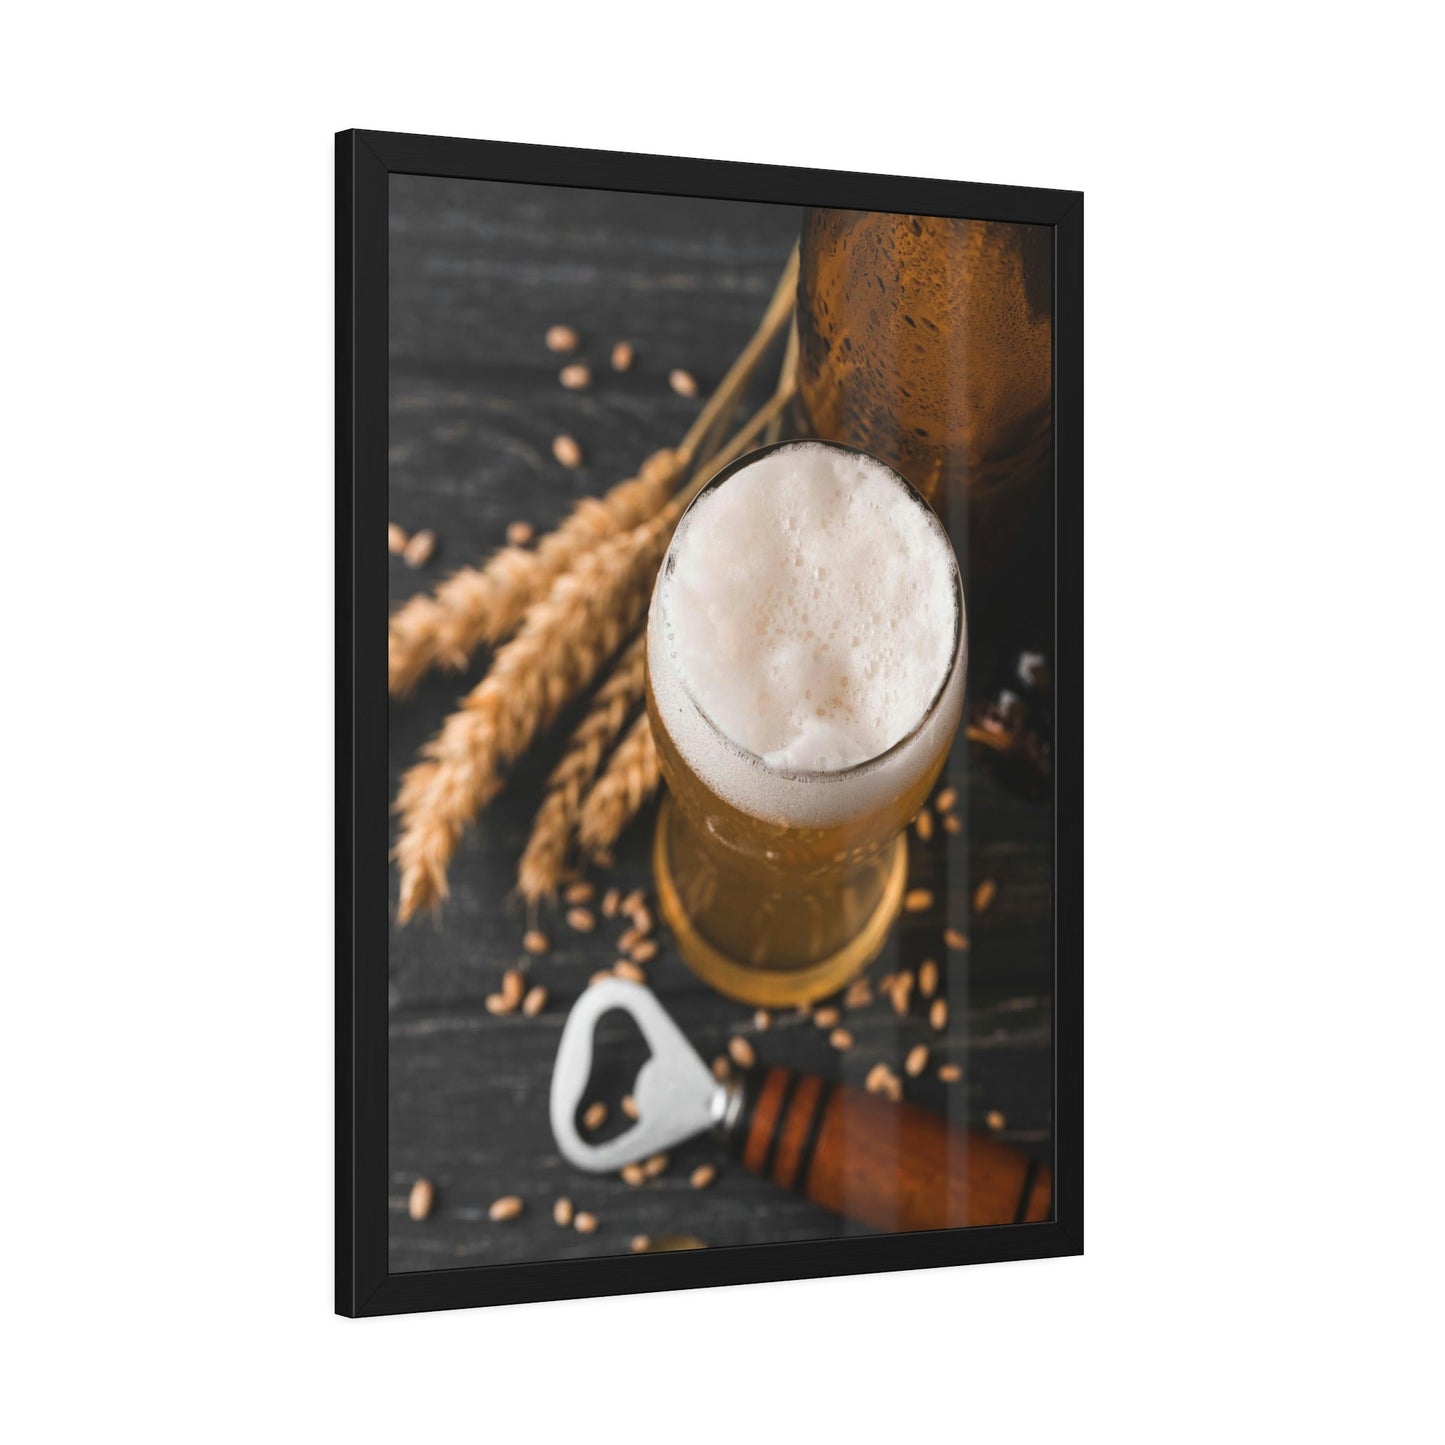 Beer Cheers: Fun and Colorful Framed Canvas Print for Your Home Bar